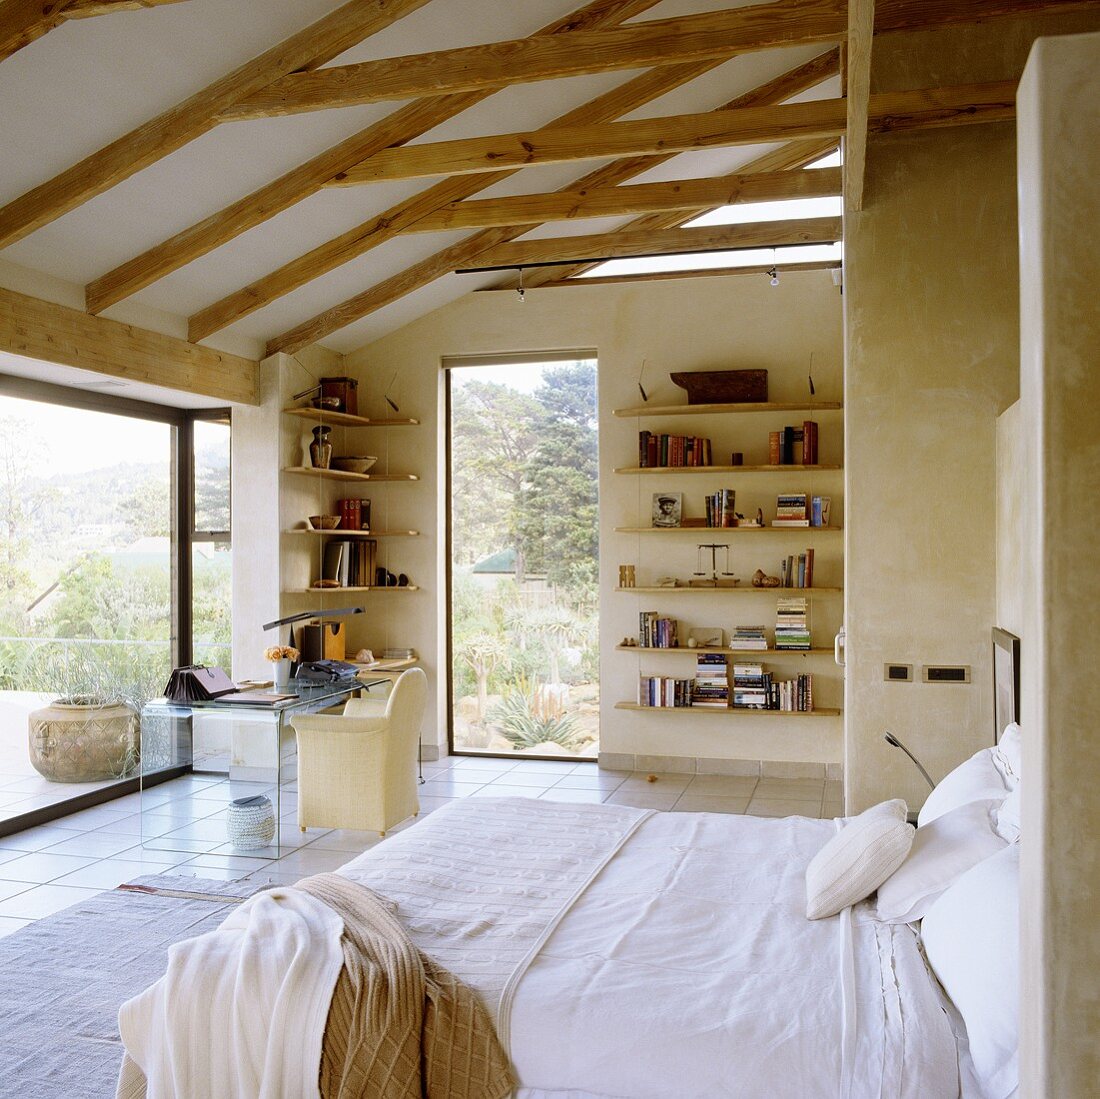 A bed with a view - a shelf on the wall under a wood beam ceiling